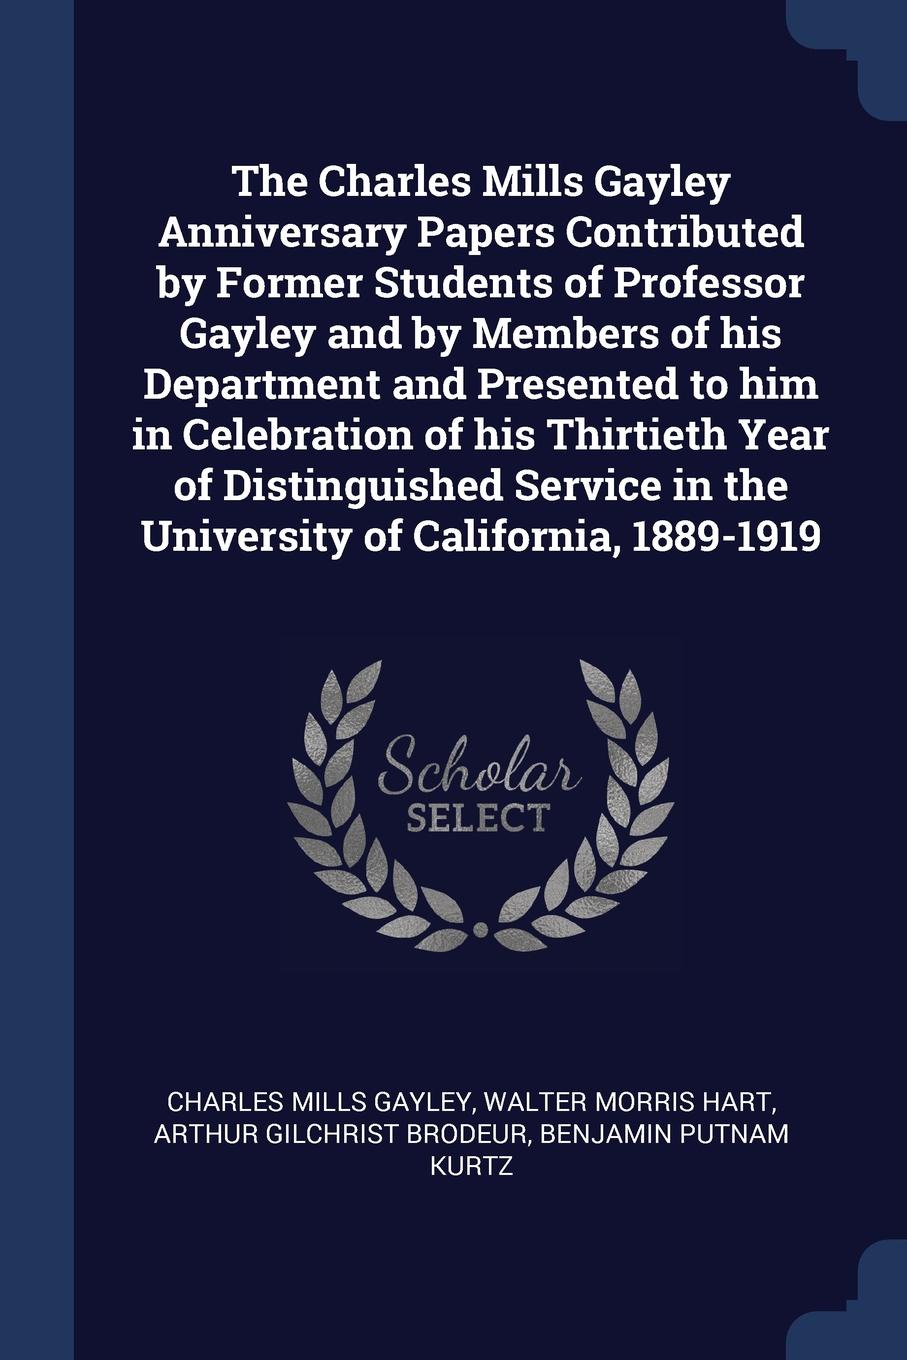 The Charles Mills Gayley Anniversary Papers Contributed by Former Students of Professor Gayley and by Members of his Department and Presented to him in Celebration of his Thirtieth Year of Distinguished Service in the University of California, 188...